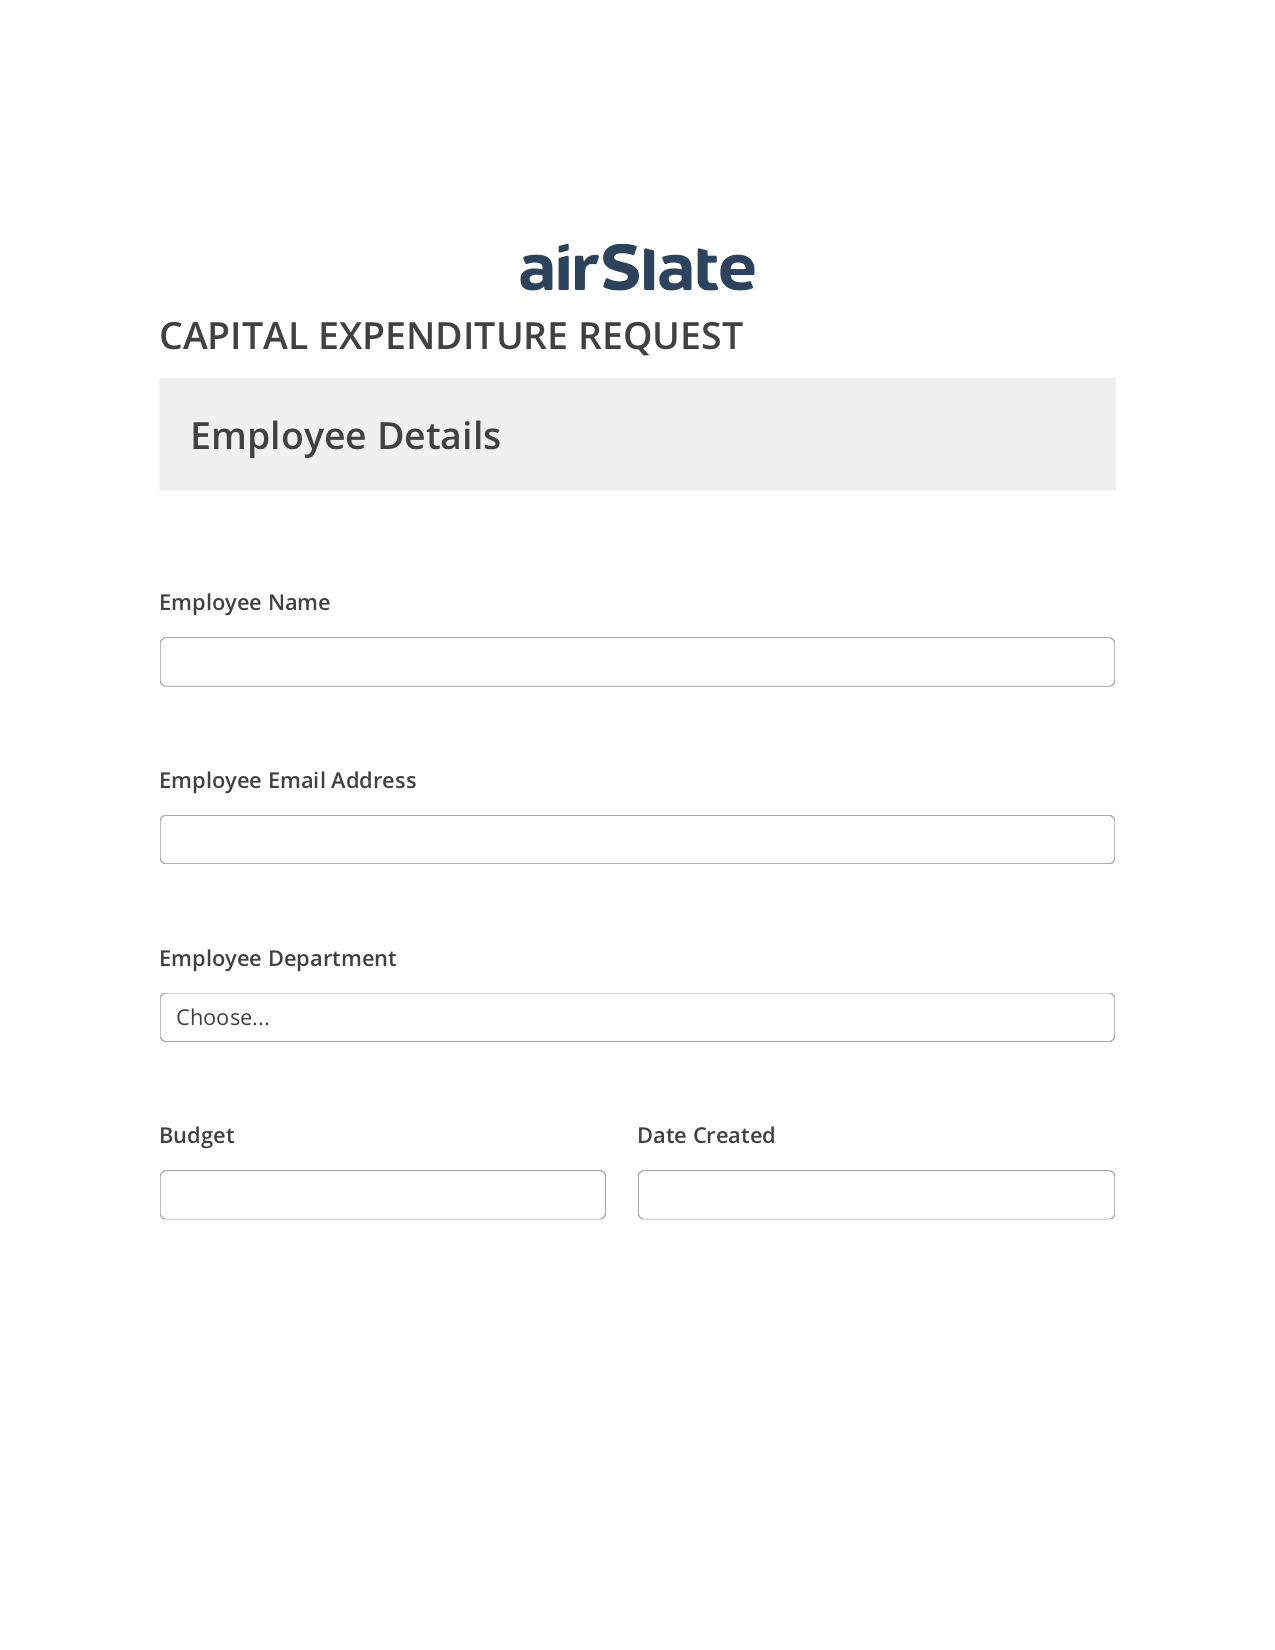 Capital Expenditure Request Approval Workflow Pre-fill from CSV File Bot, Jira Bot, Slack Two-Way Binding